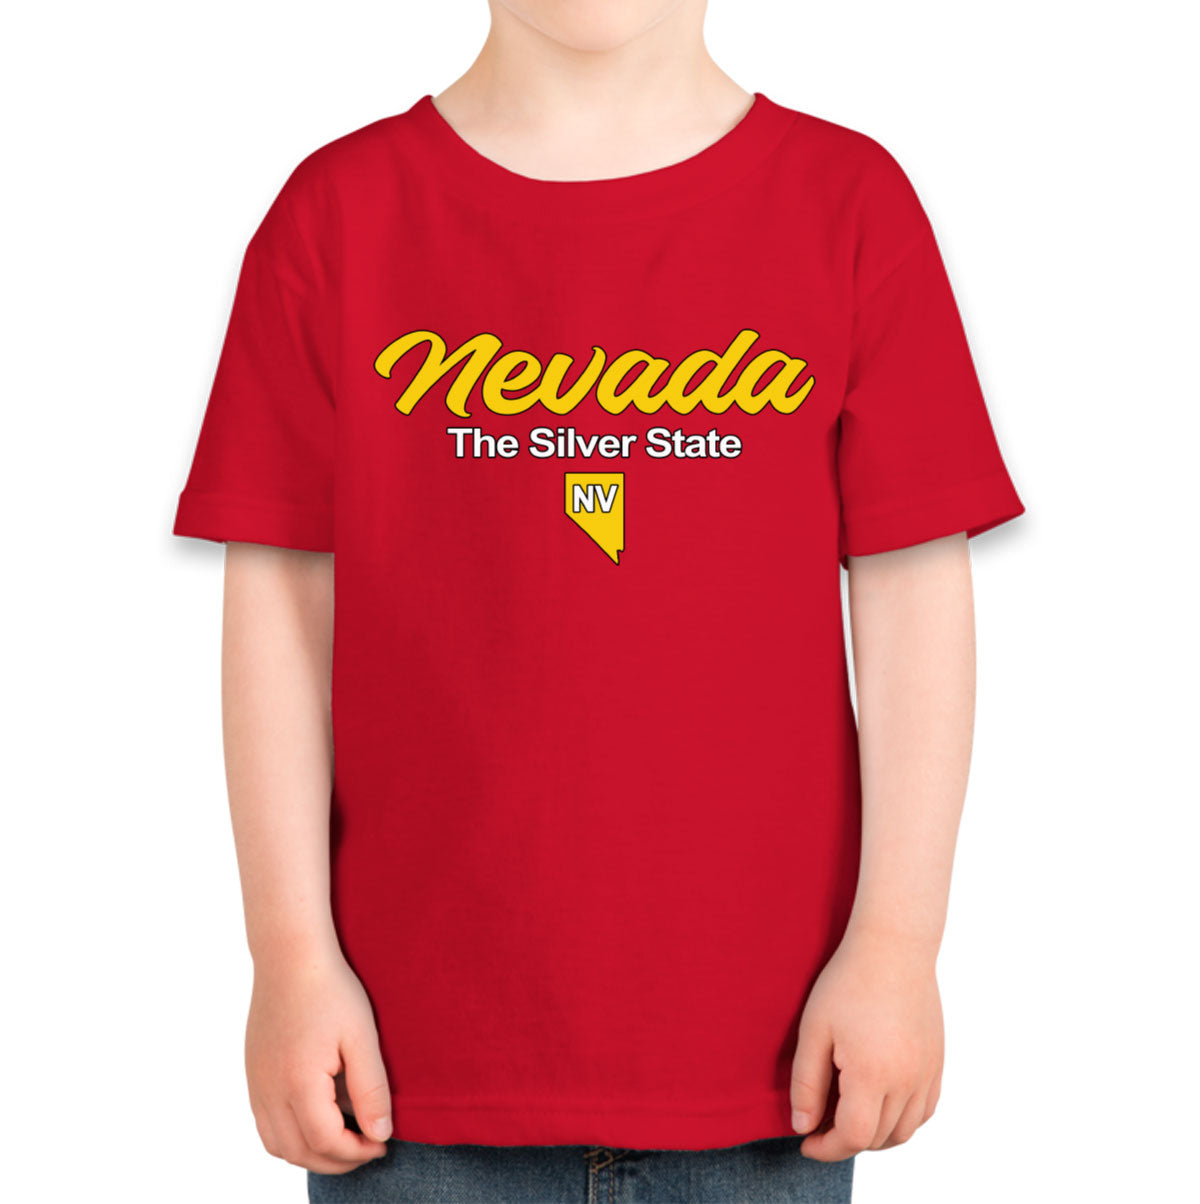 Nevada The Silver State Toddler T-shirt